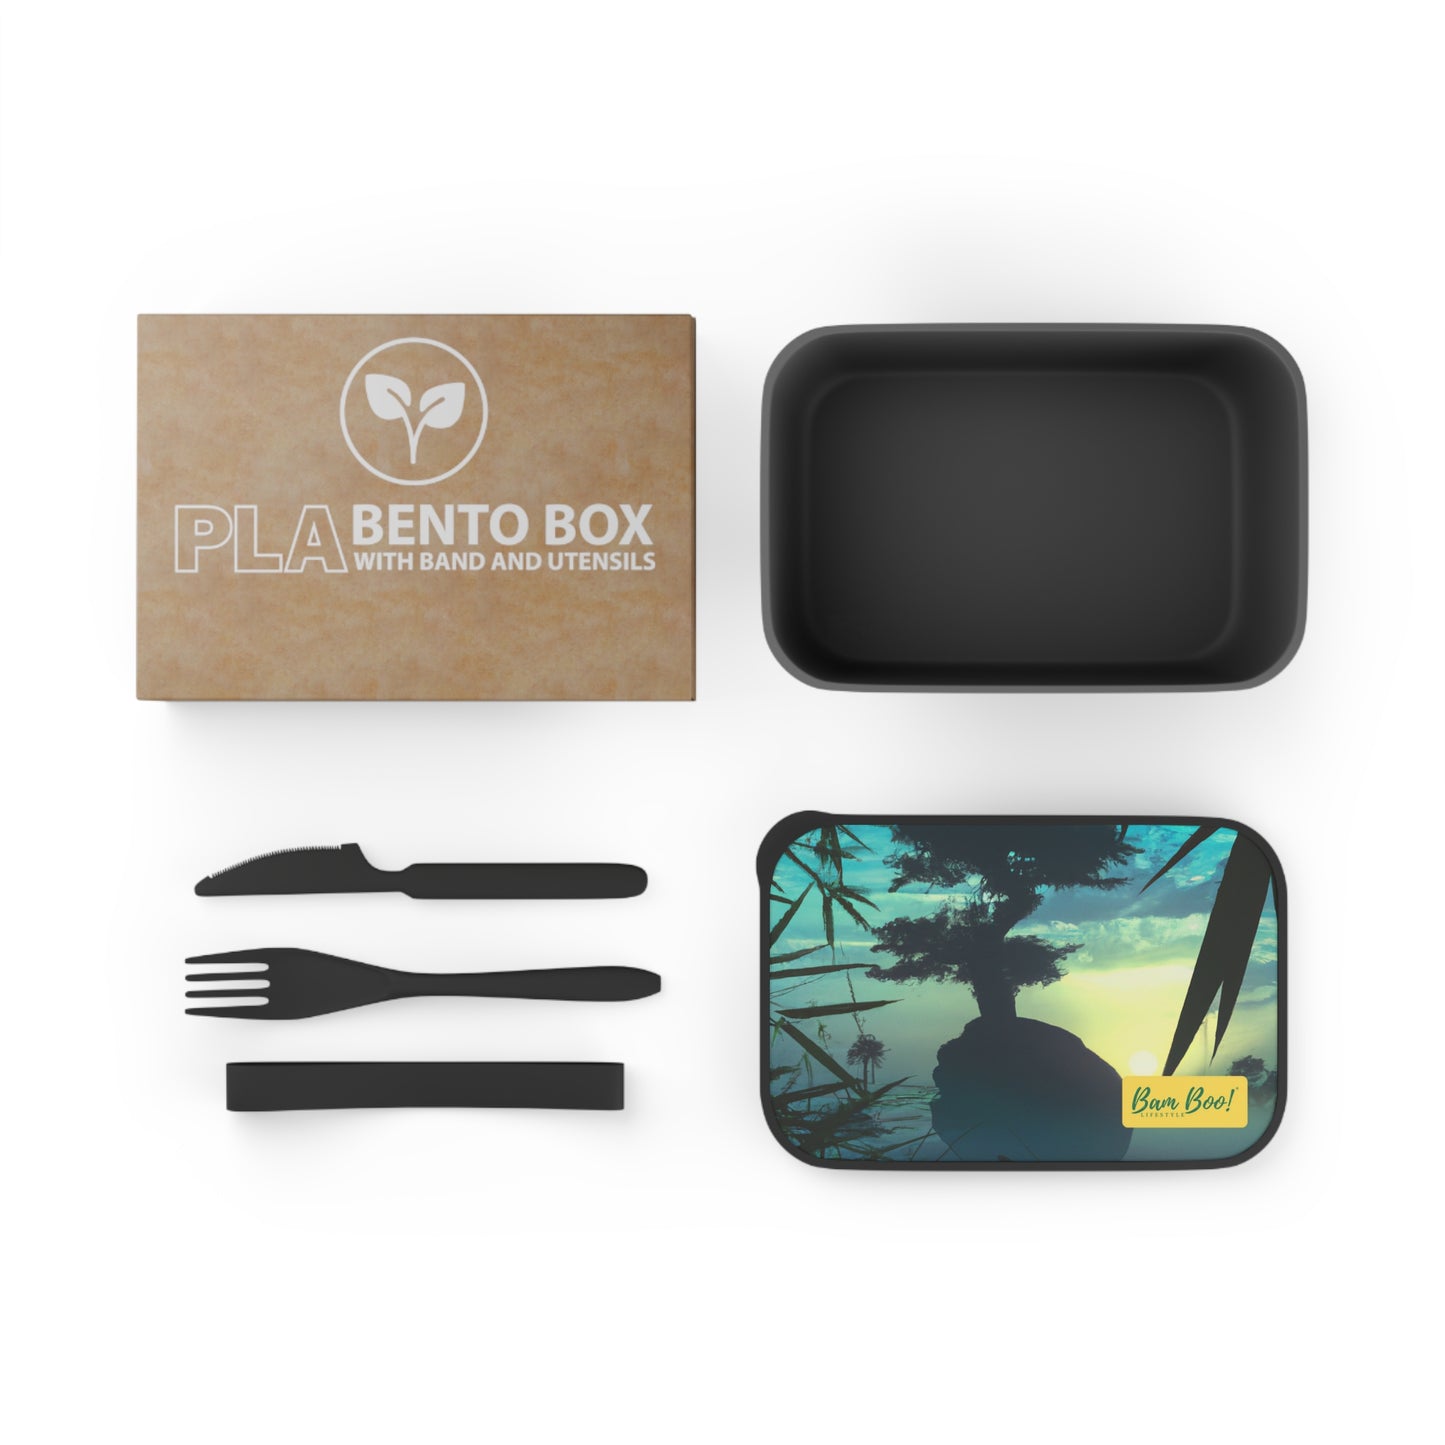 "The Art of Nature's Textures" - Bam Boo! Lifestyle Eco-friendly PLA Bento Box with Band and Utensils